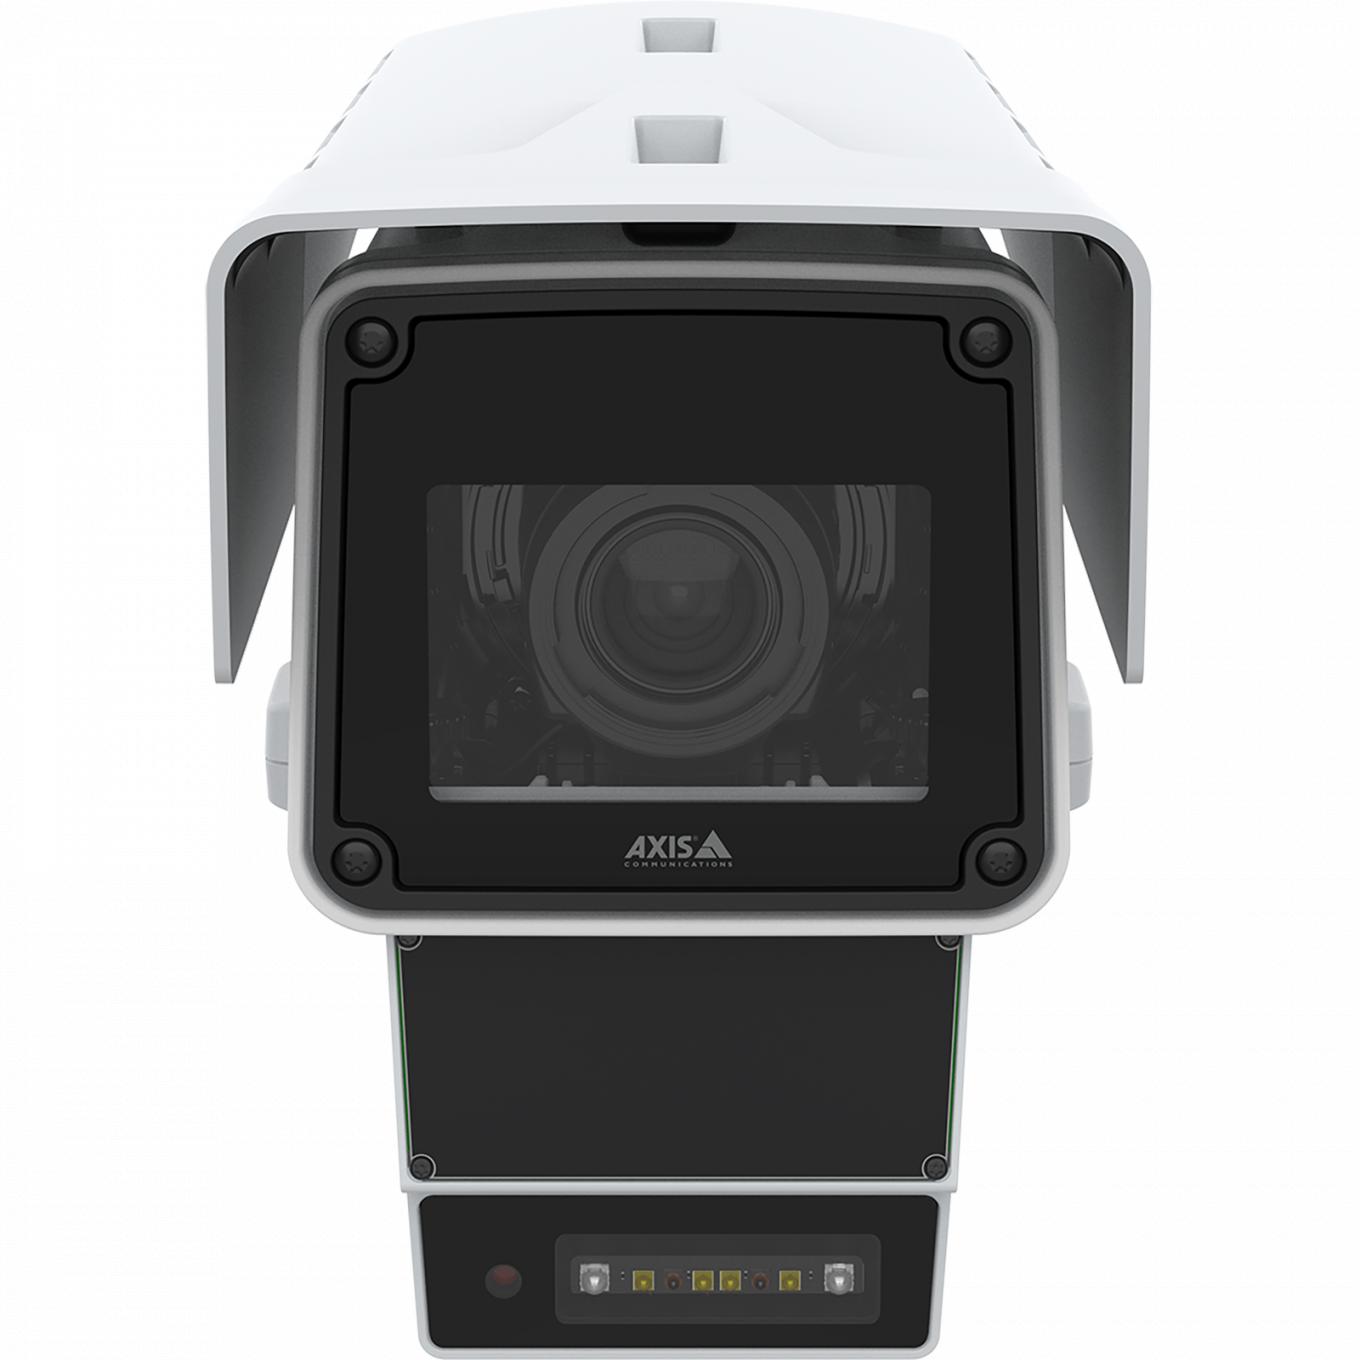 AXIS Q1656-DLE Radar-Video Fusion Camera (正面から見た図)